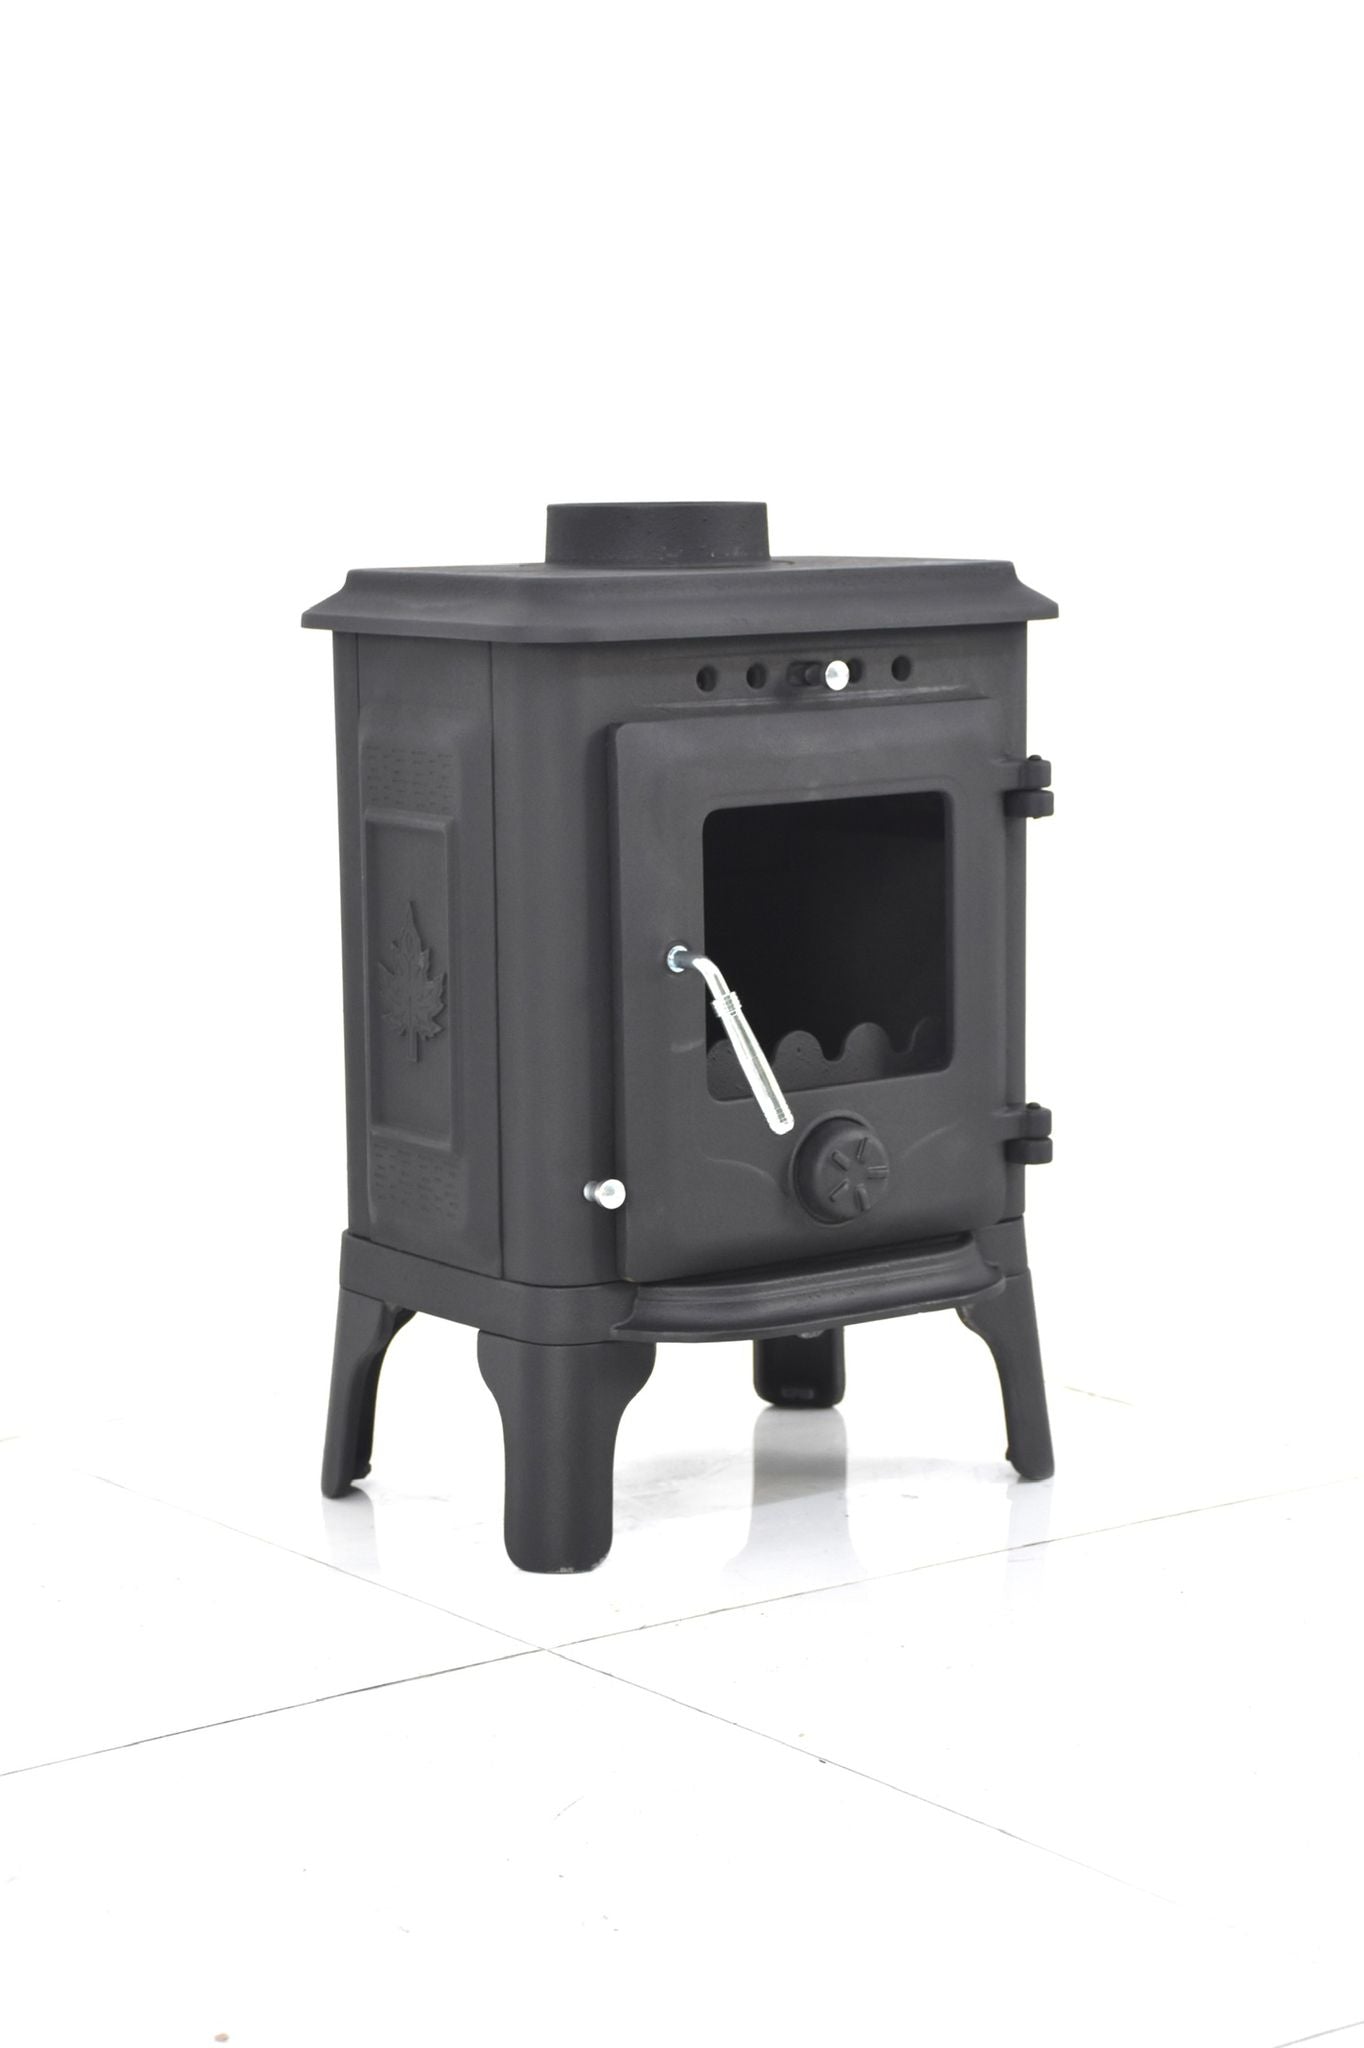 Cast iron wood stove for tiny house, caravans and small places